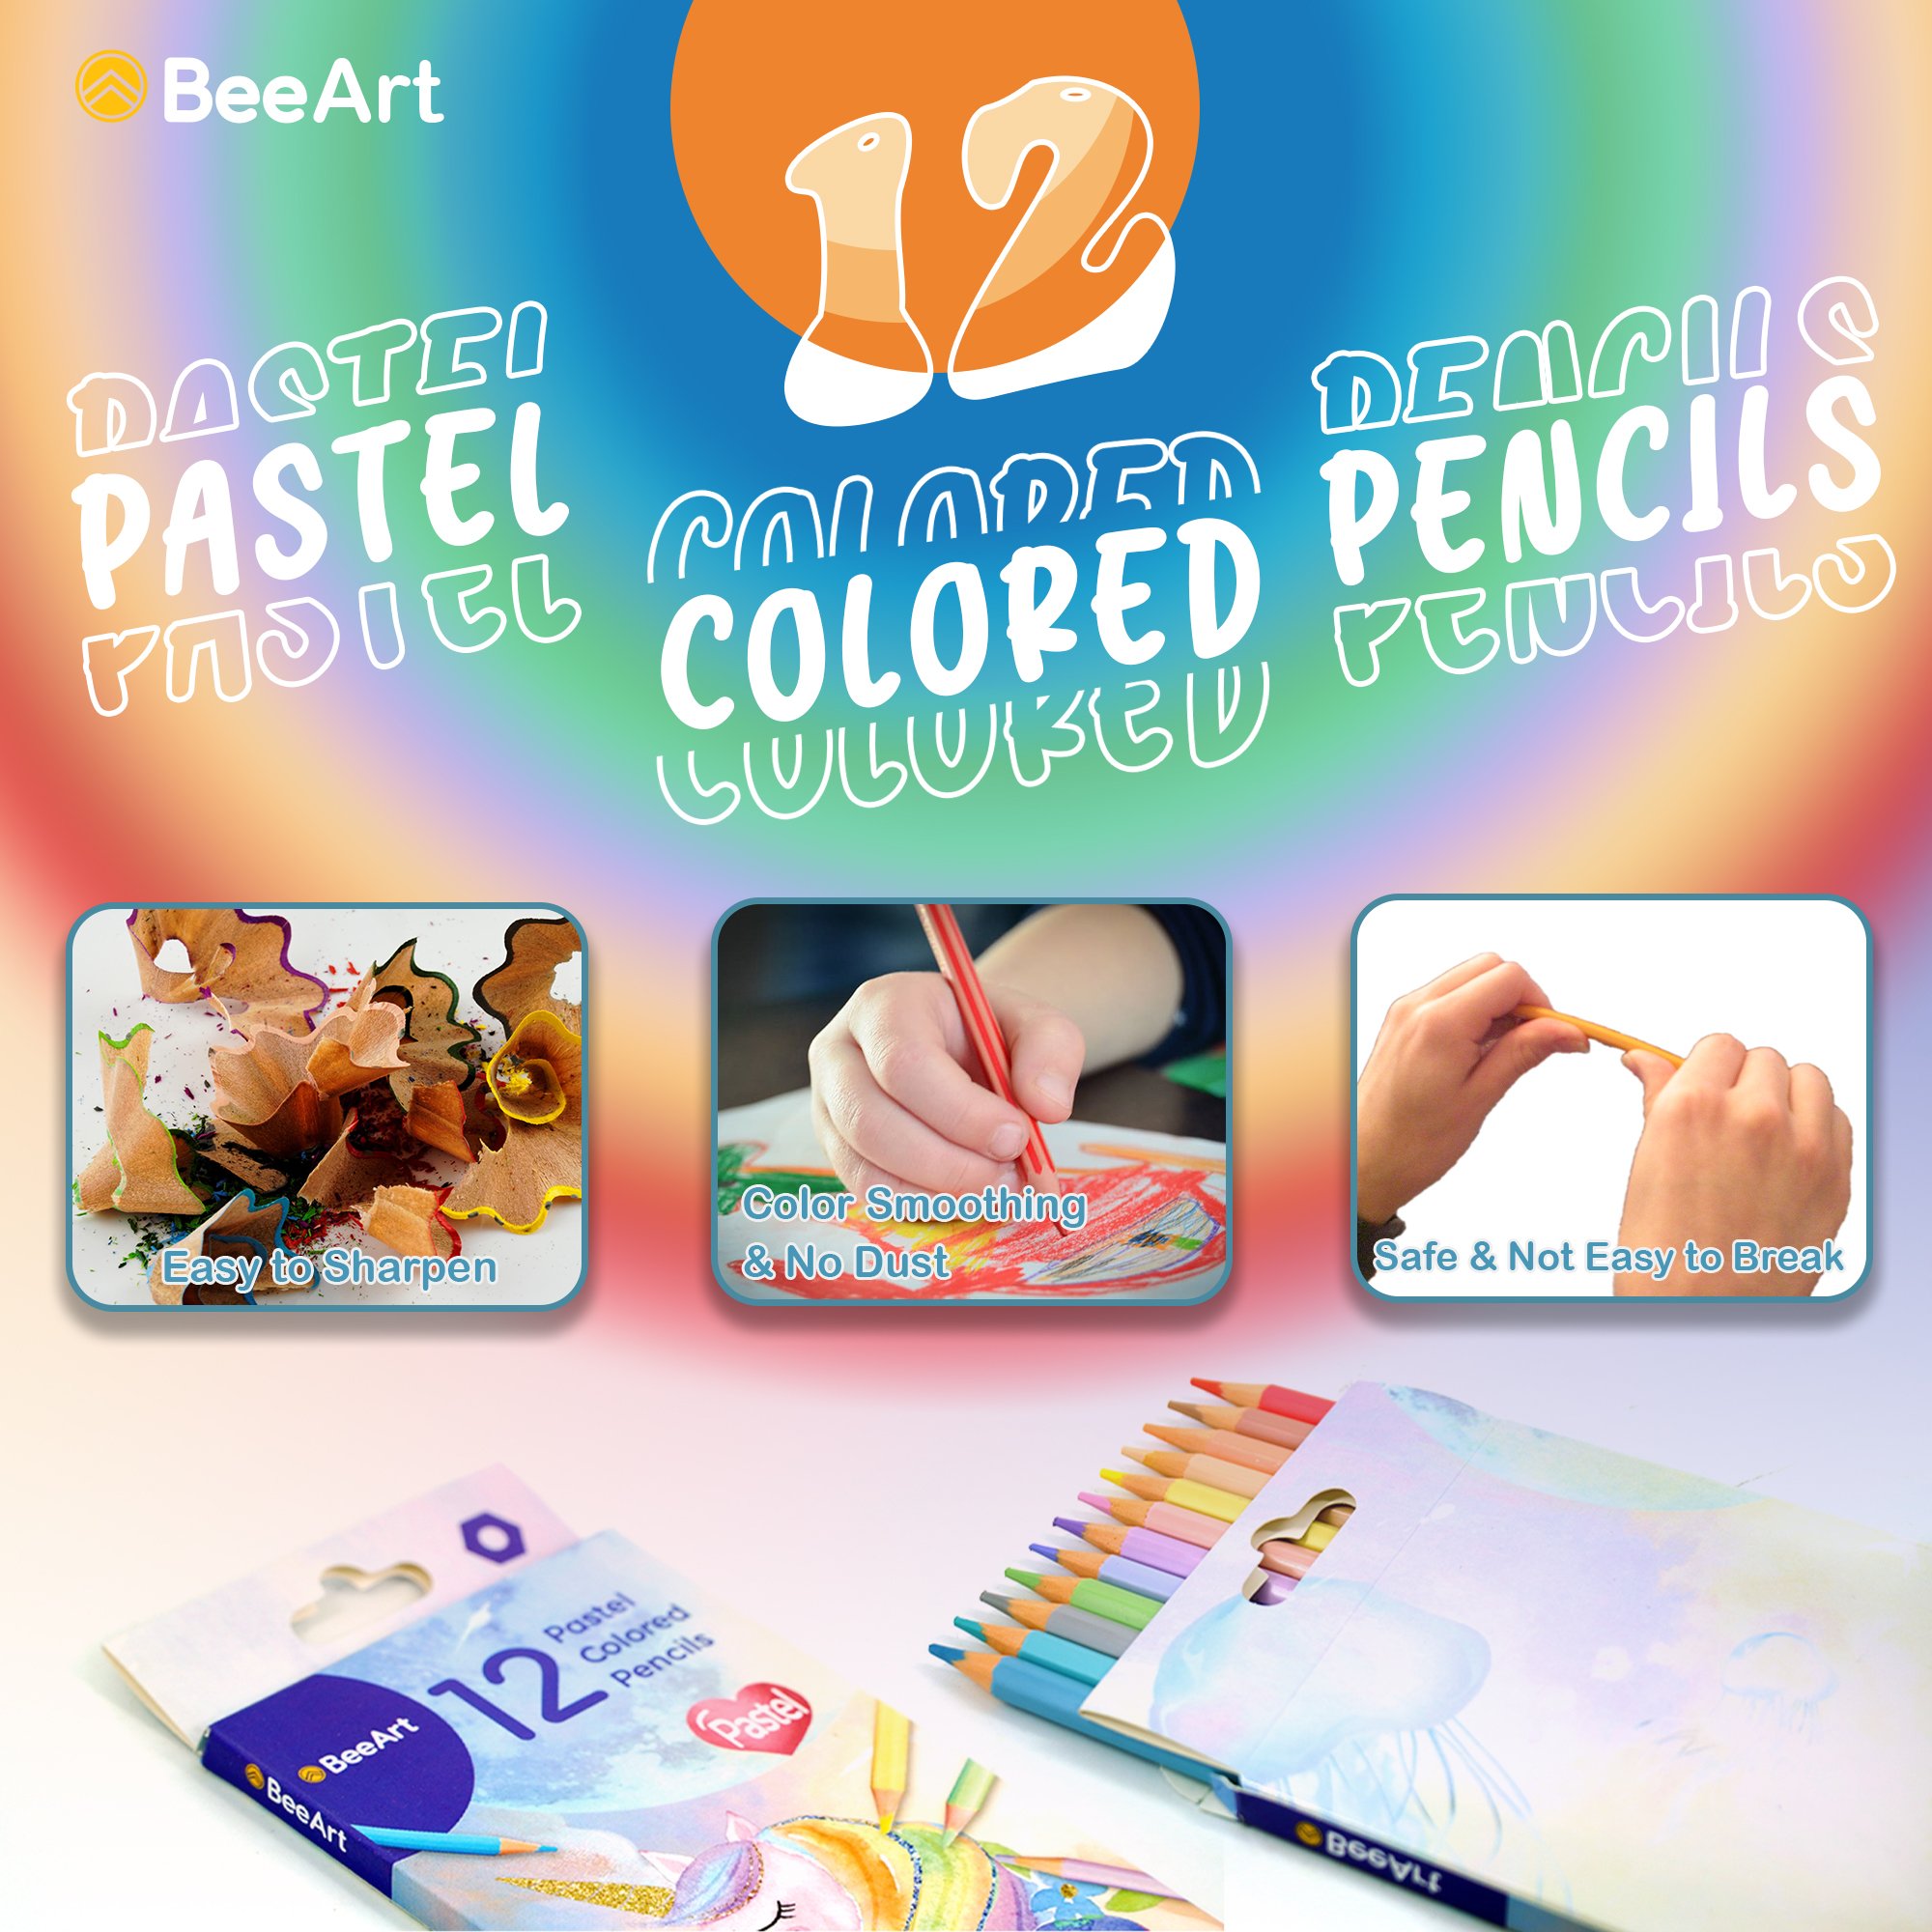 BeeArt Erase Colored Pencils, Plastic, Pastel coloring for adult and kids, Pack of 12